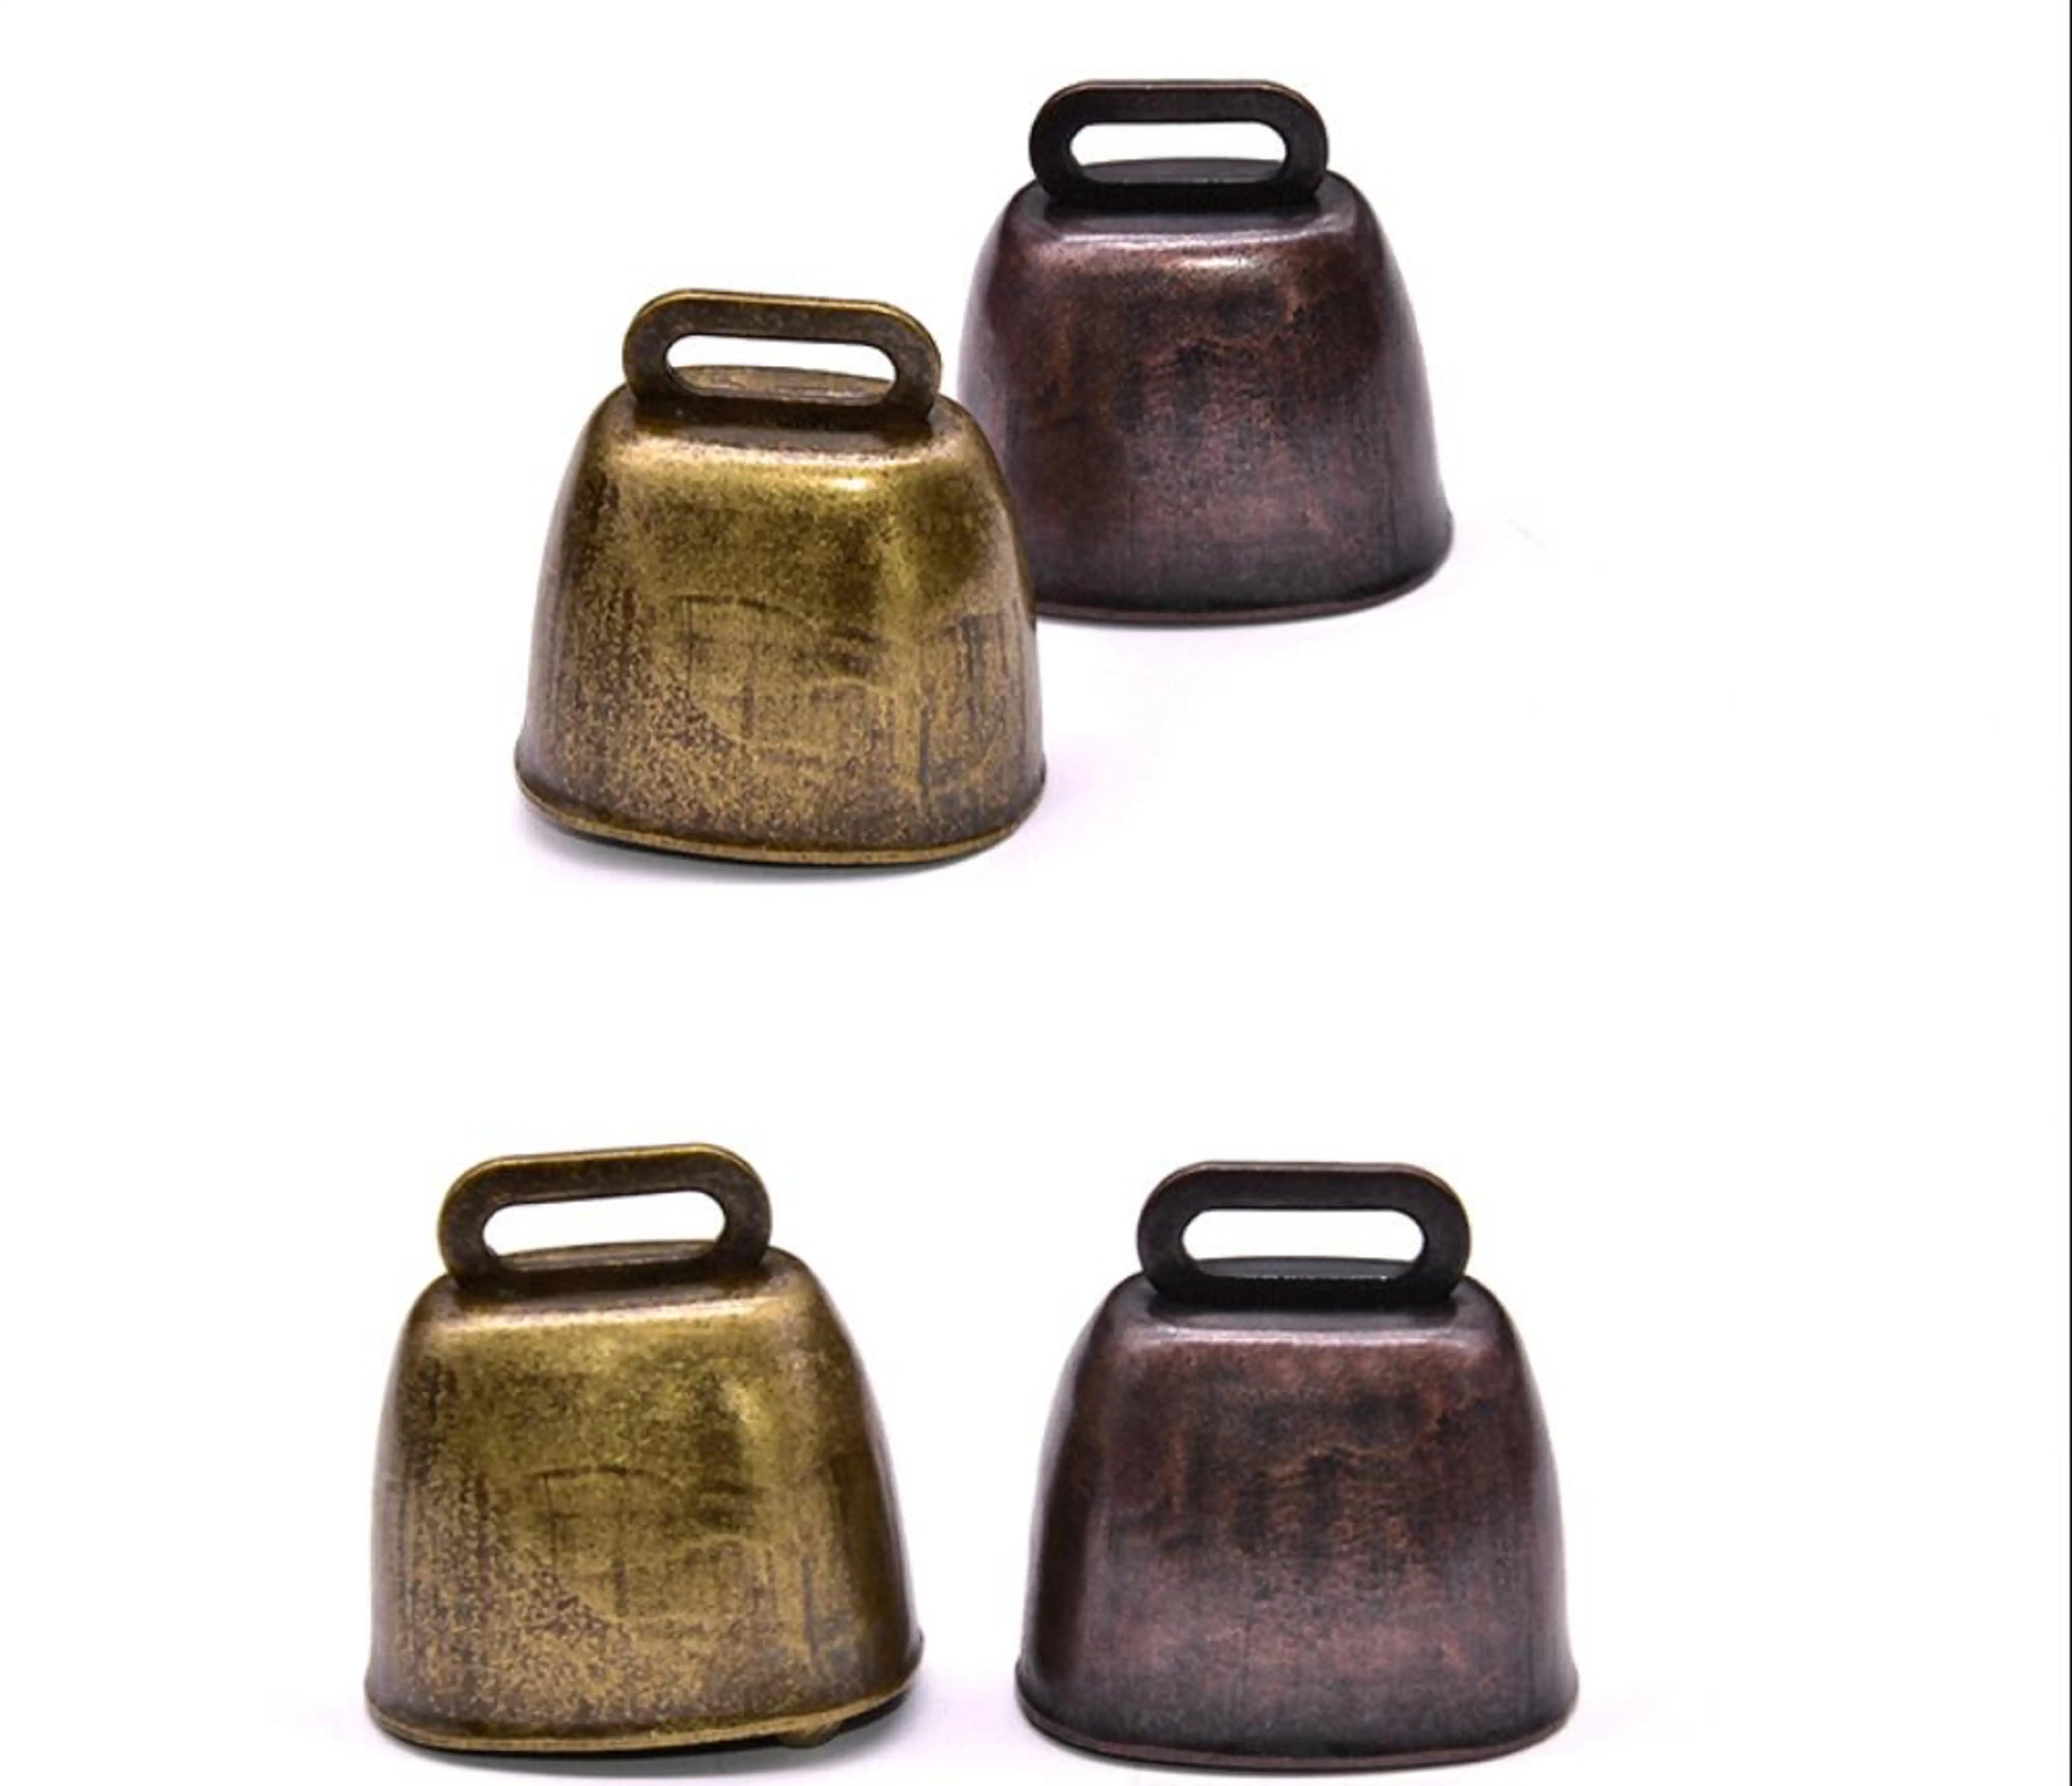 

Get 4 pieces / Vintage rusty sheep and cow Bell ,Christmas farm bell Cow Bell, Vintage Metal Cow or Sheep Bell for dog Shepherd